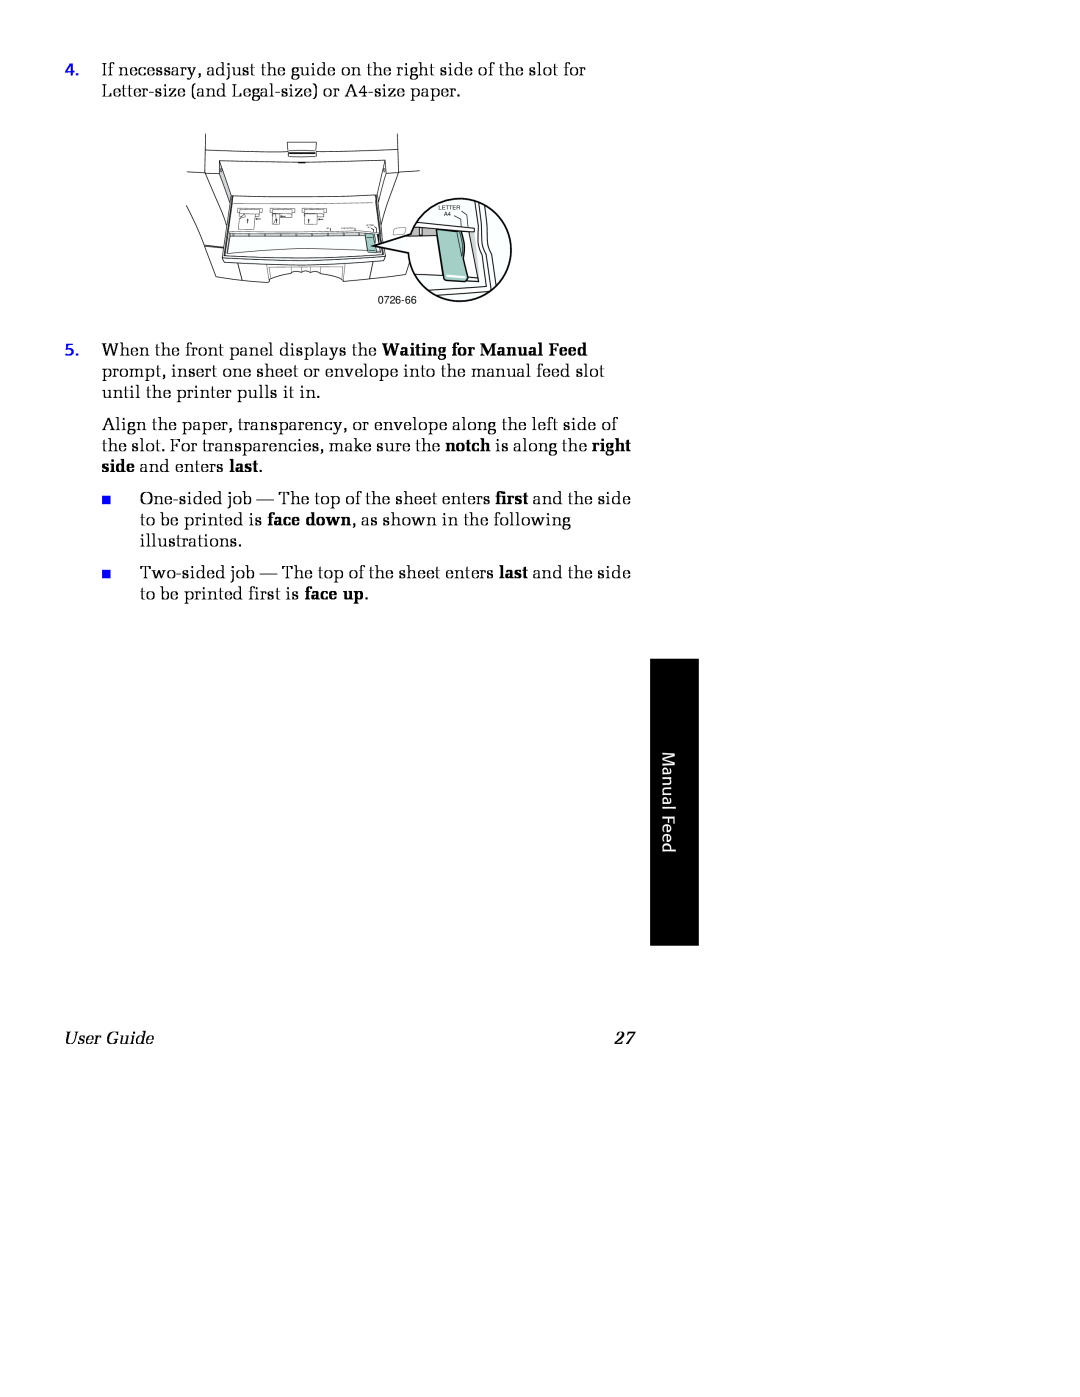 Xerox Phaser 860 manual Manual Feed, User Guide, LETTER A4, Letter, Executive 